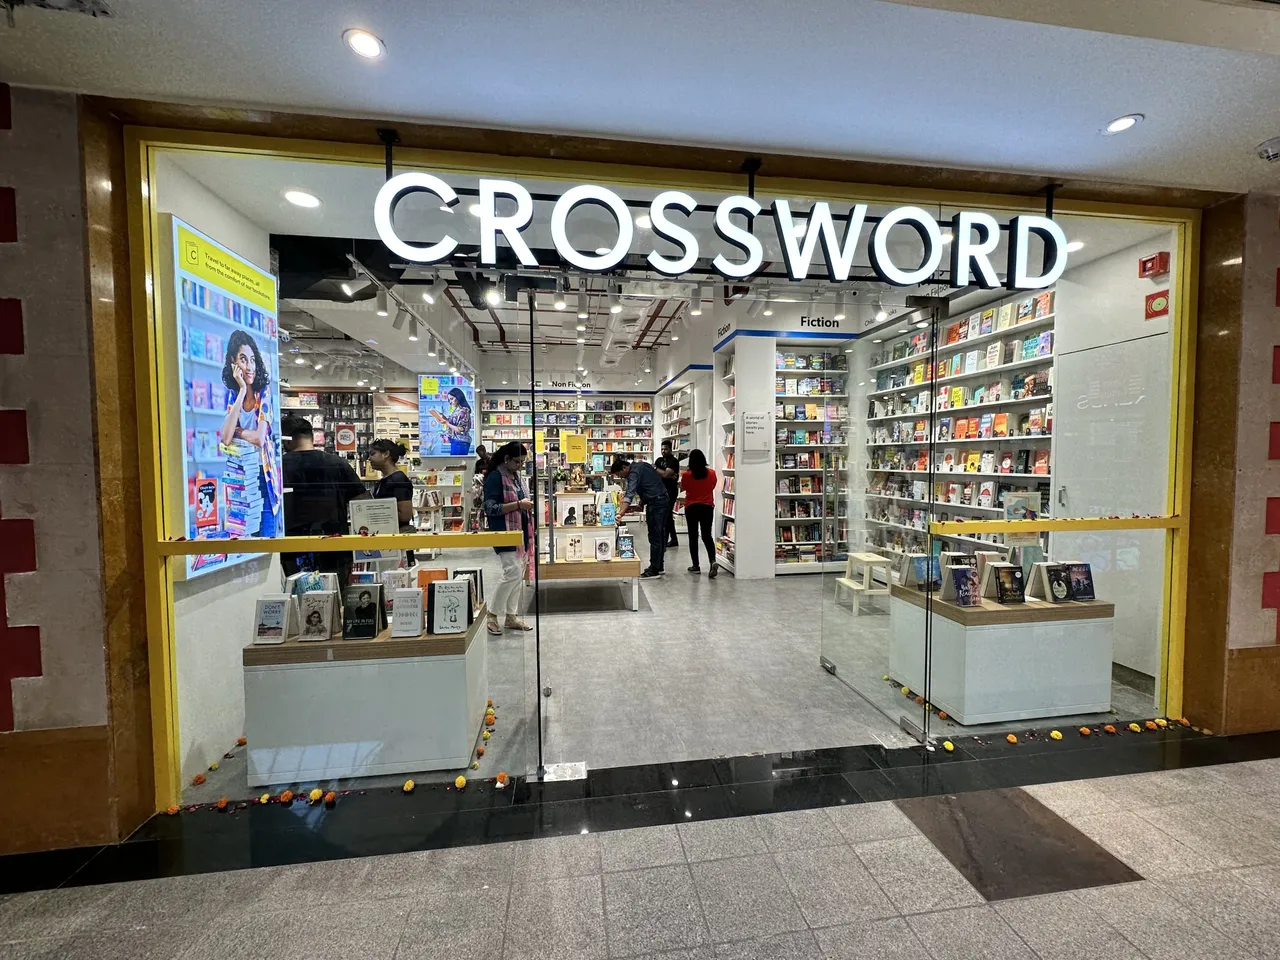 Calling Book lovers to the refreshed Crossword Bookstore at Growel's 101 Mall in Mumbai!